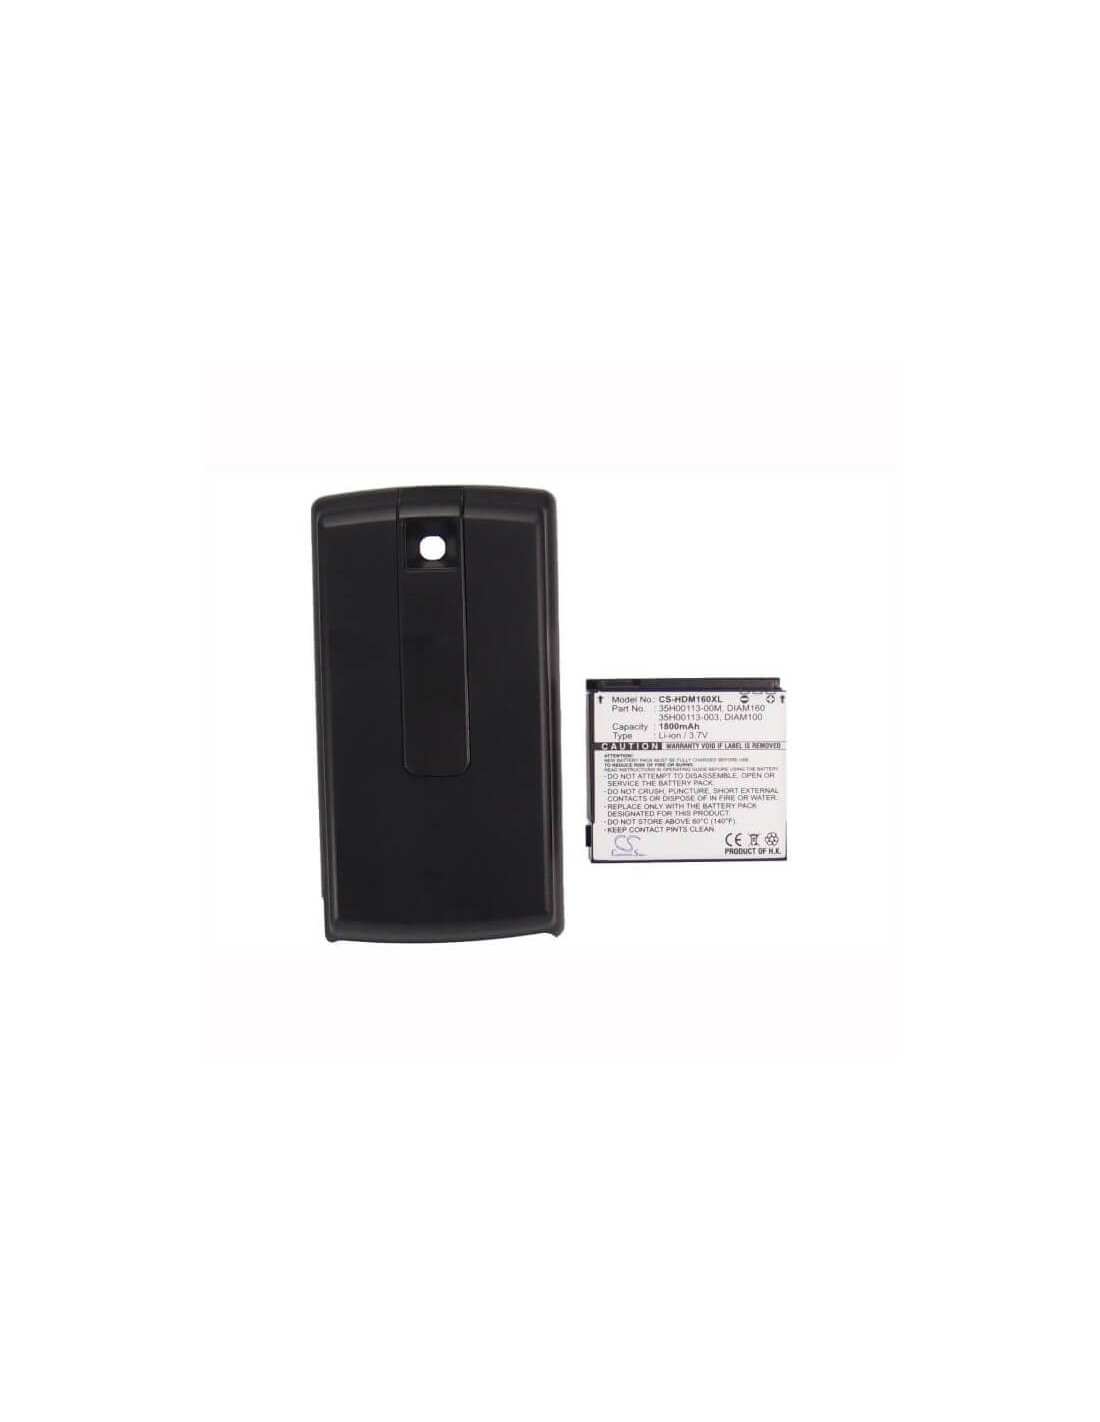 Battery for HTC Touch Diamond P3702, Touch Diamond P3701, Touch Diamond P3051 3.7V, 1800mAh - 6.66Wh